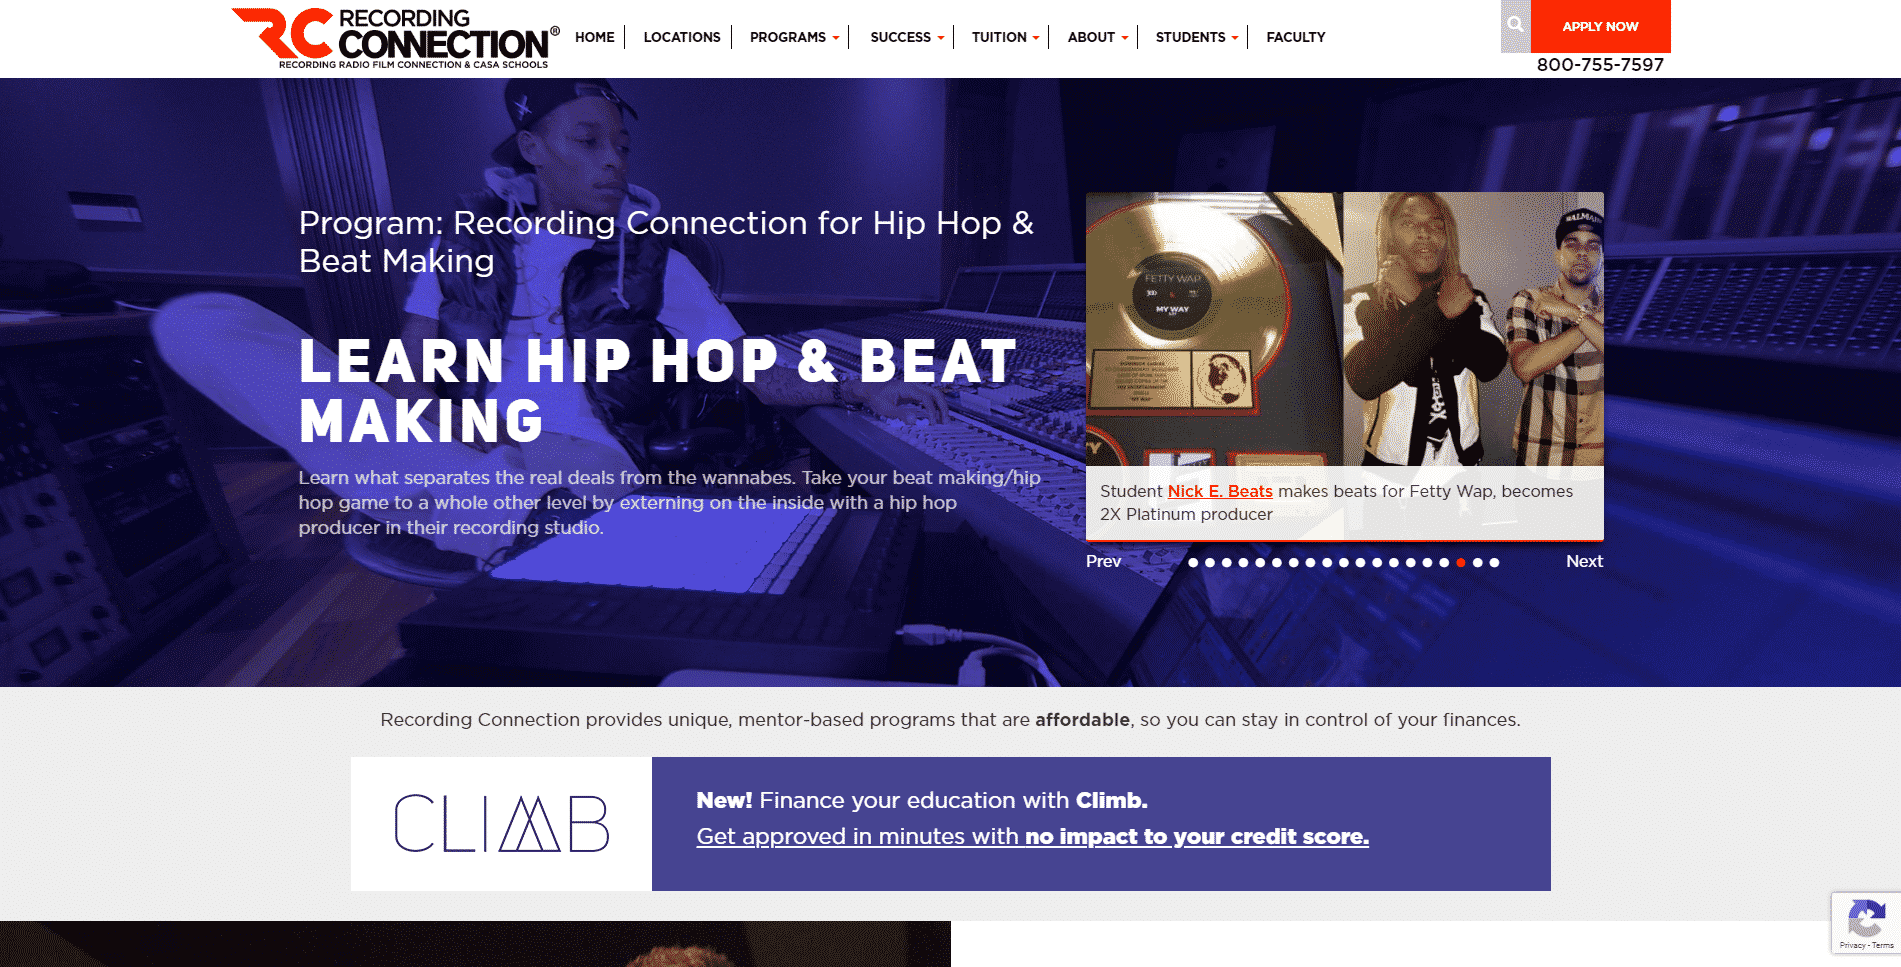 Recording connection – Online Music Production and Beatmaking Lessons